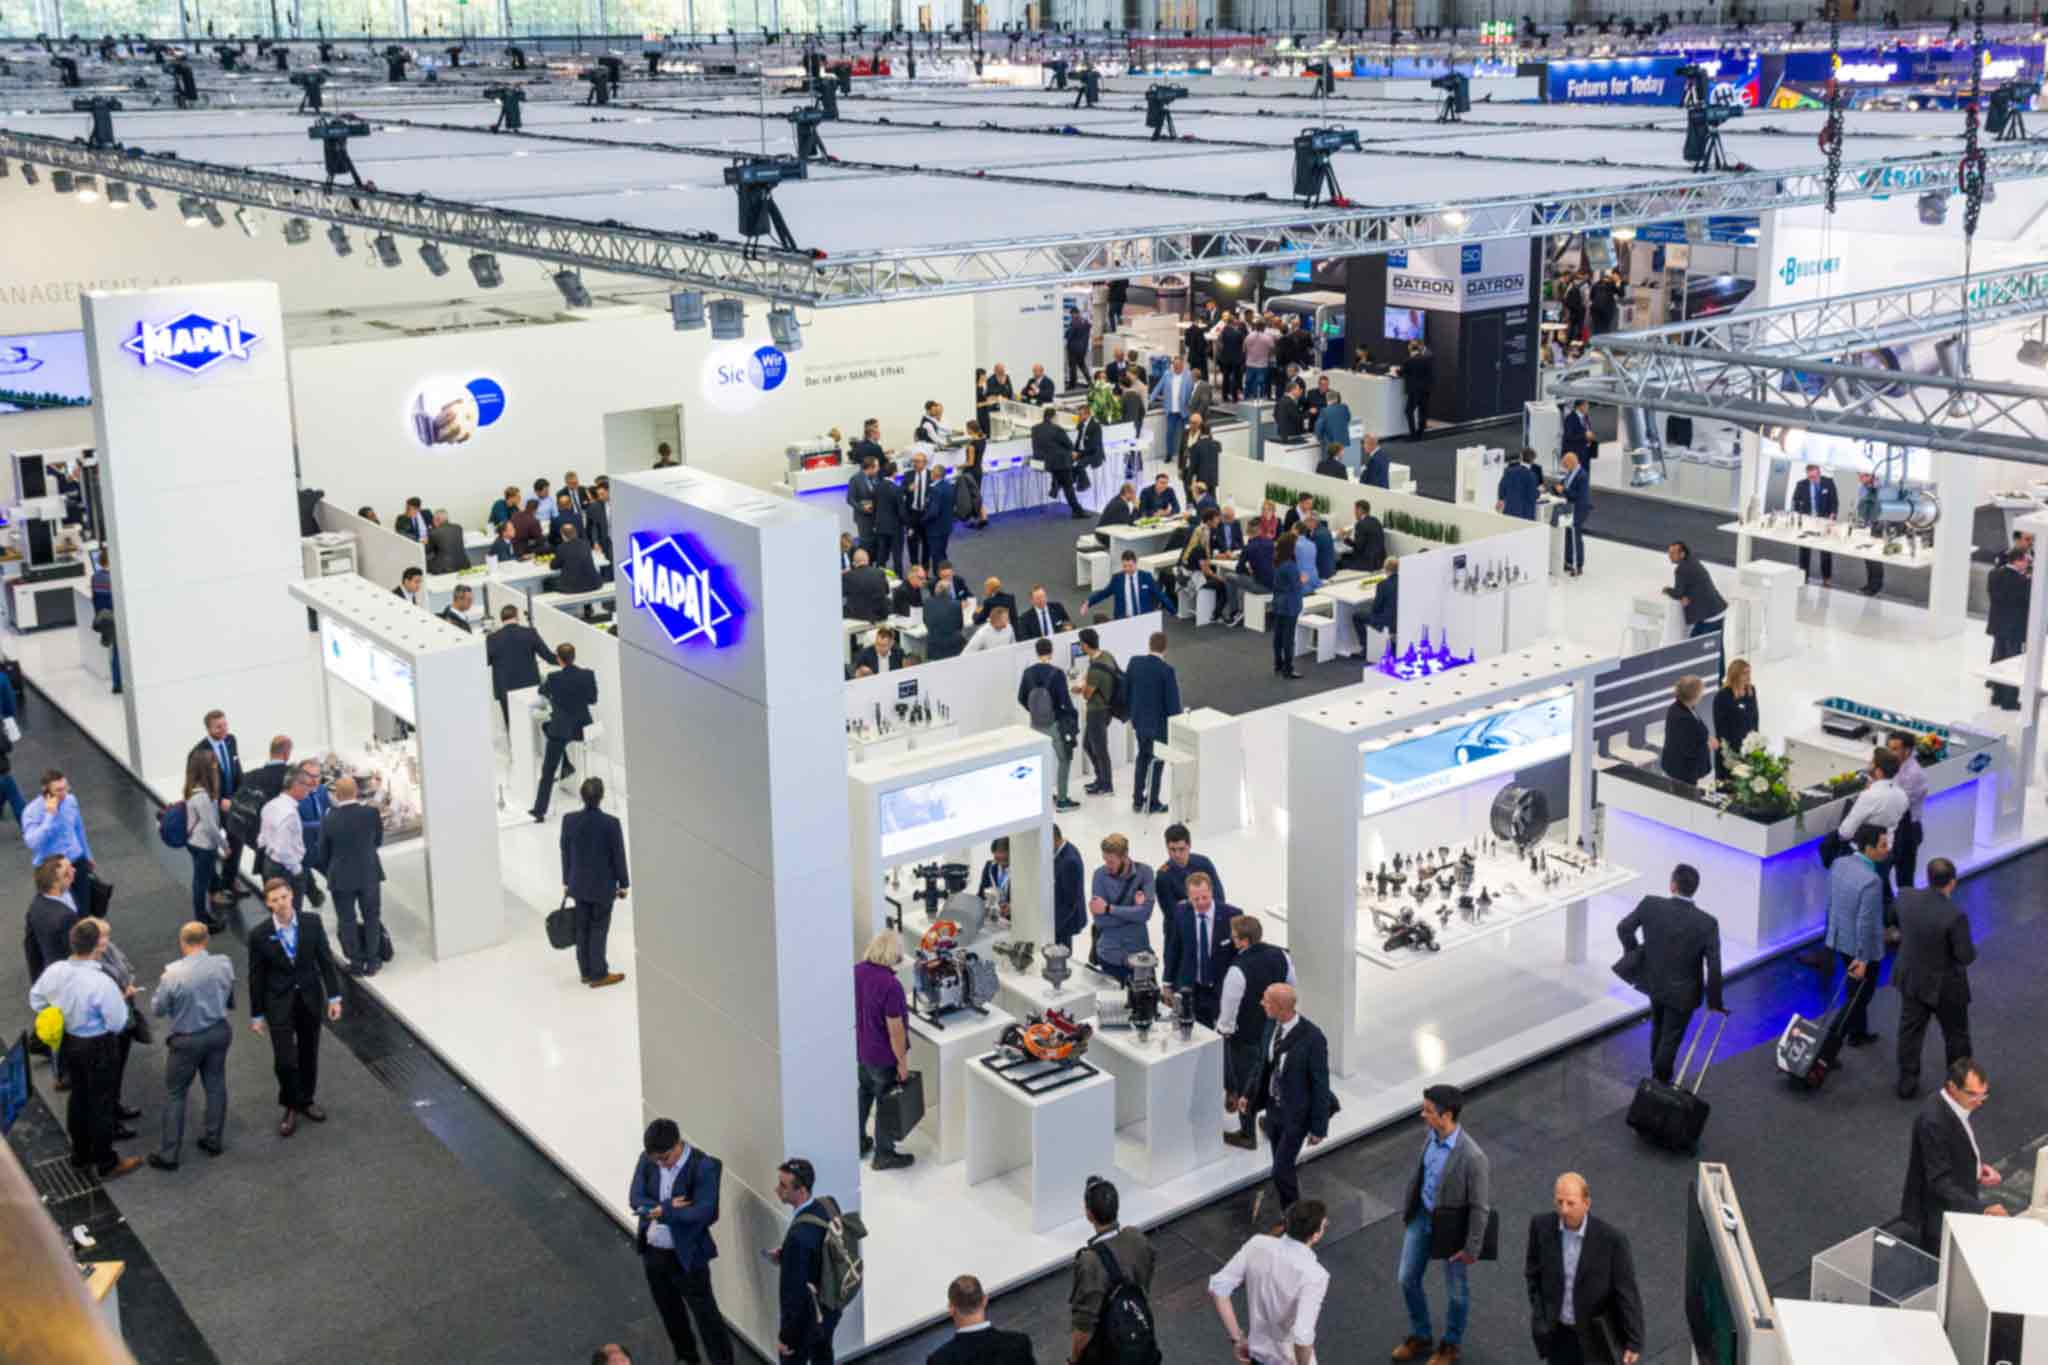 The busy MAPAL stand at EMO 2019 is shown diagonally from above.